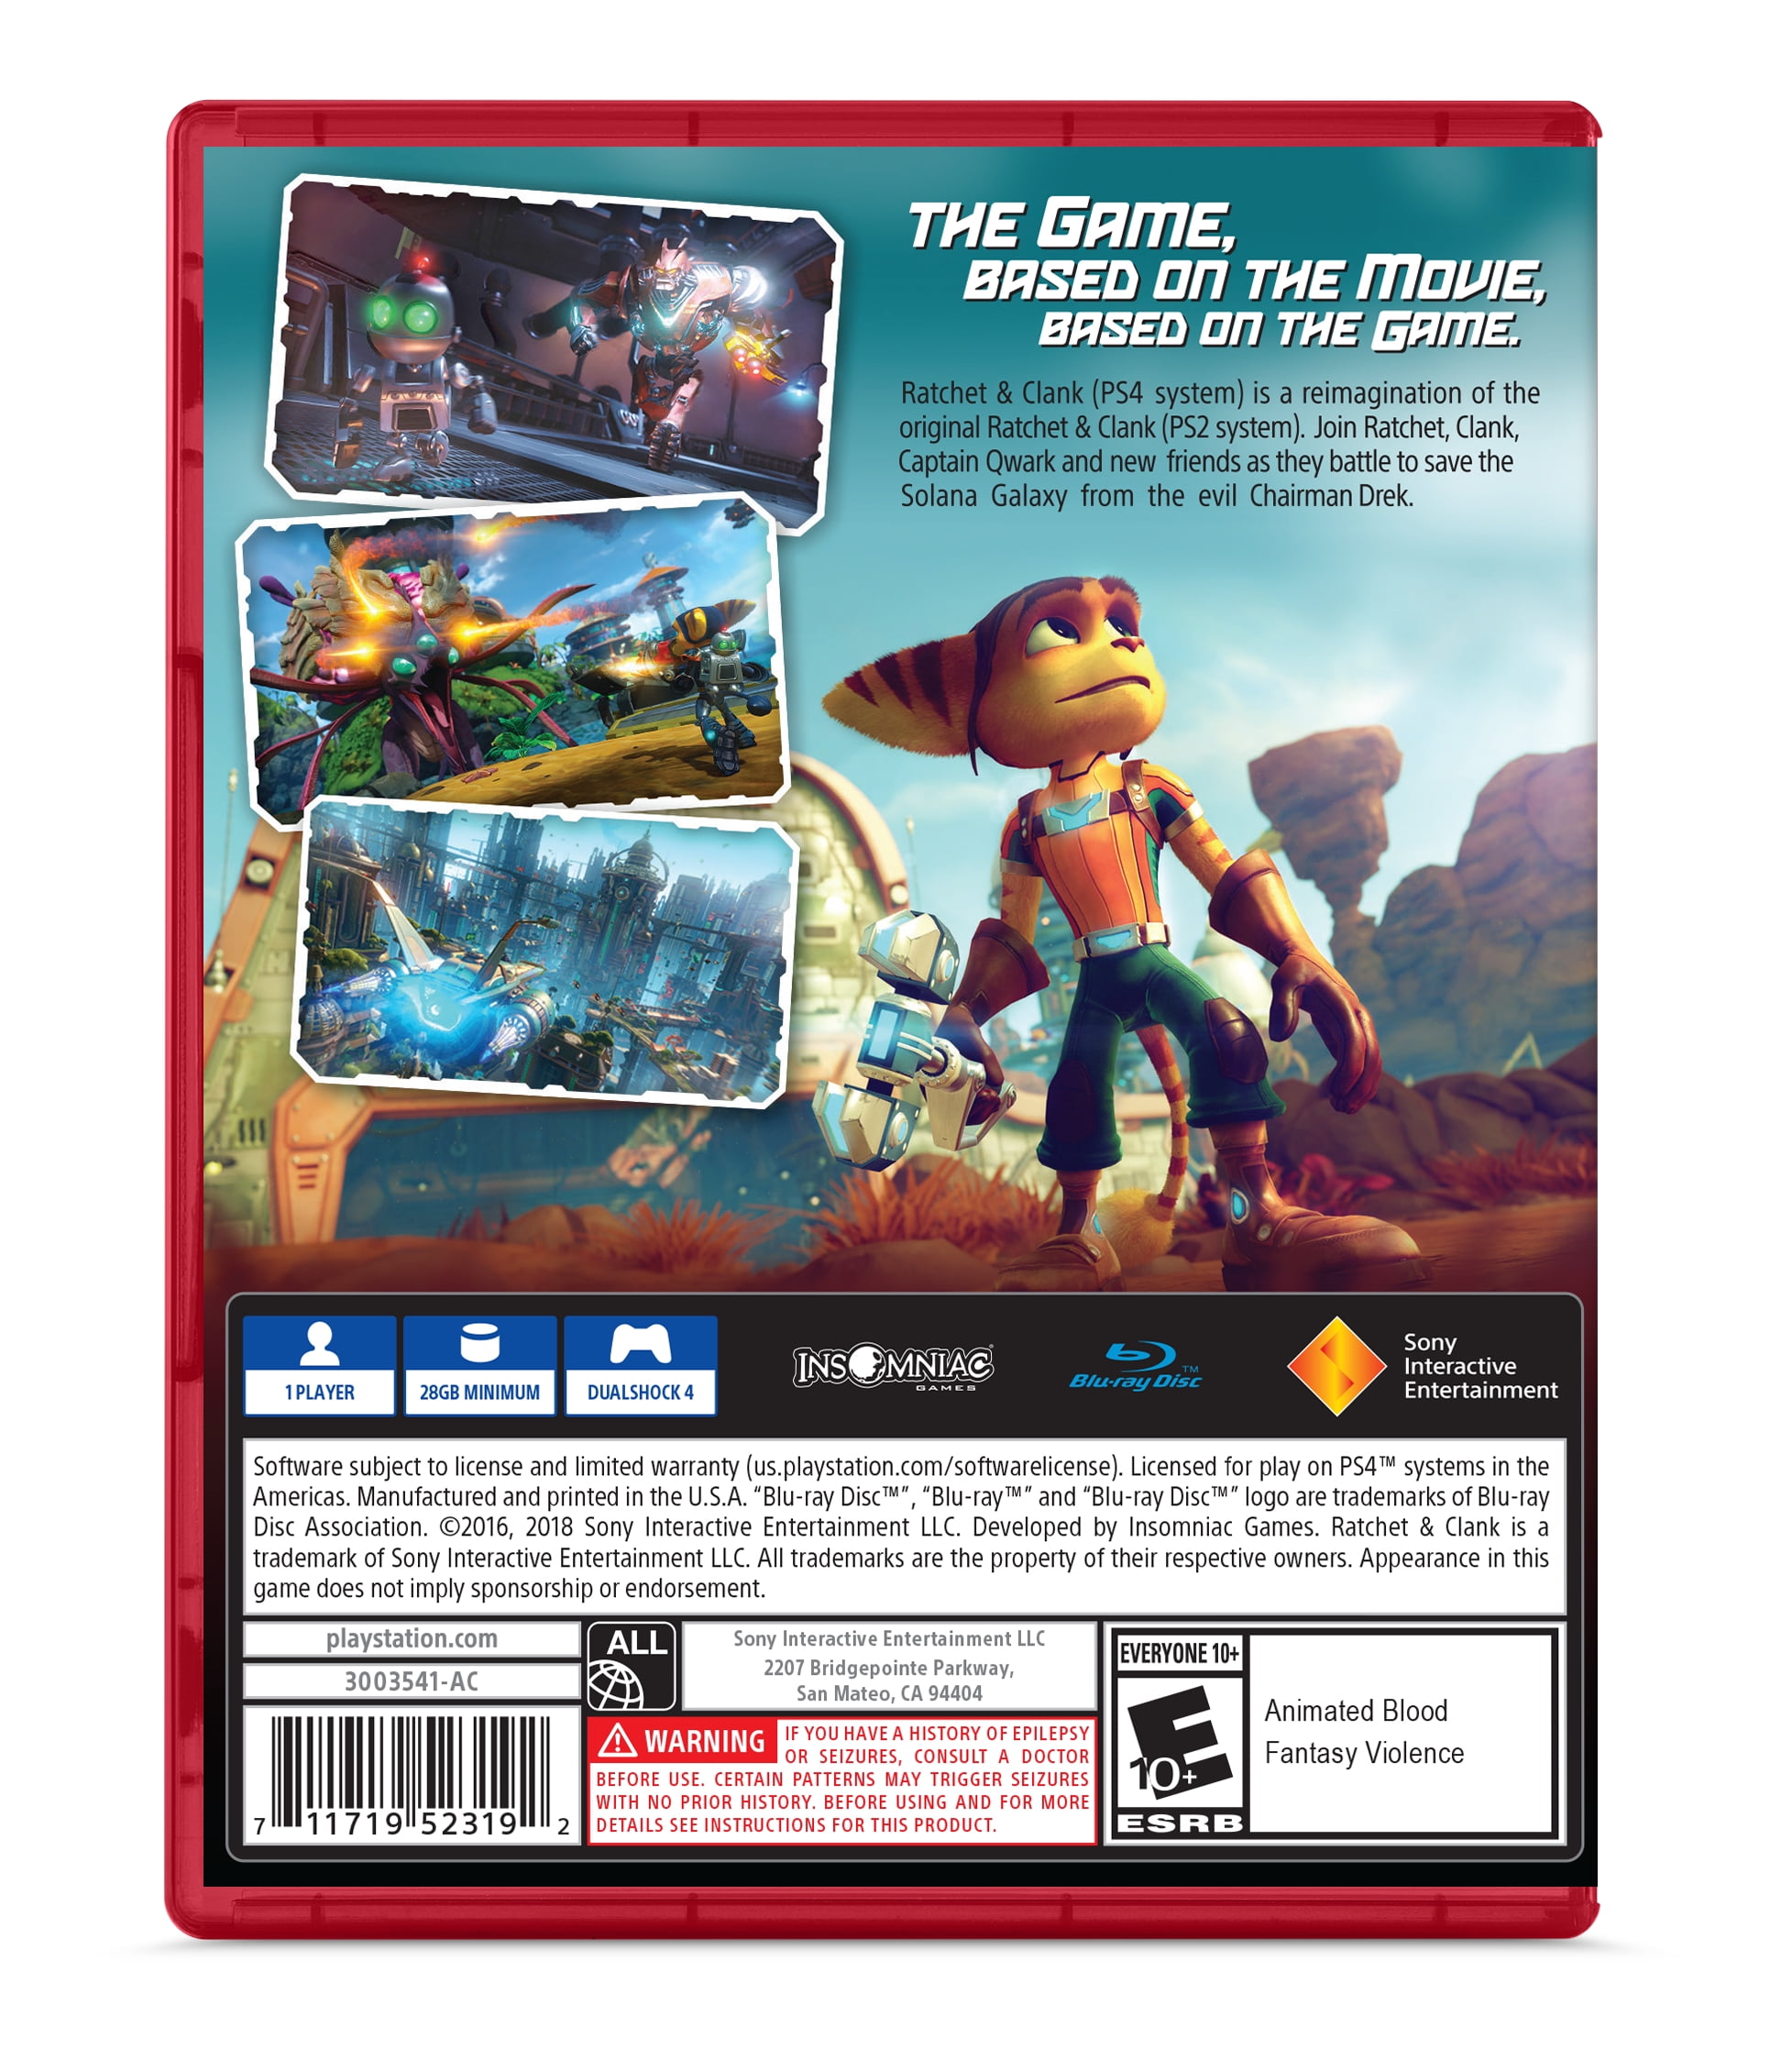 Ratchet & Clank PS4 free to keep in March with latest Sony Play at Home  promo